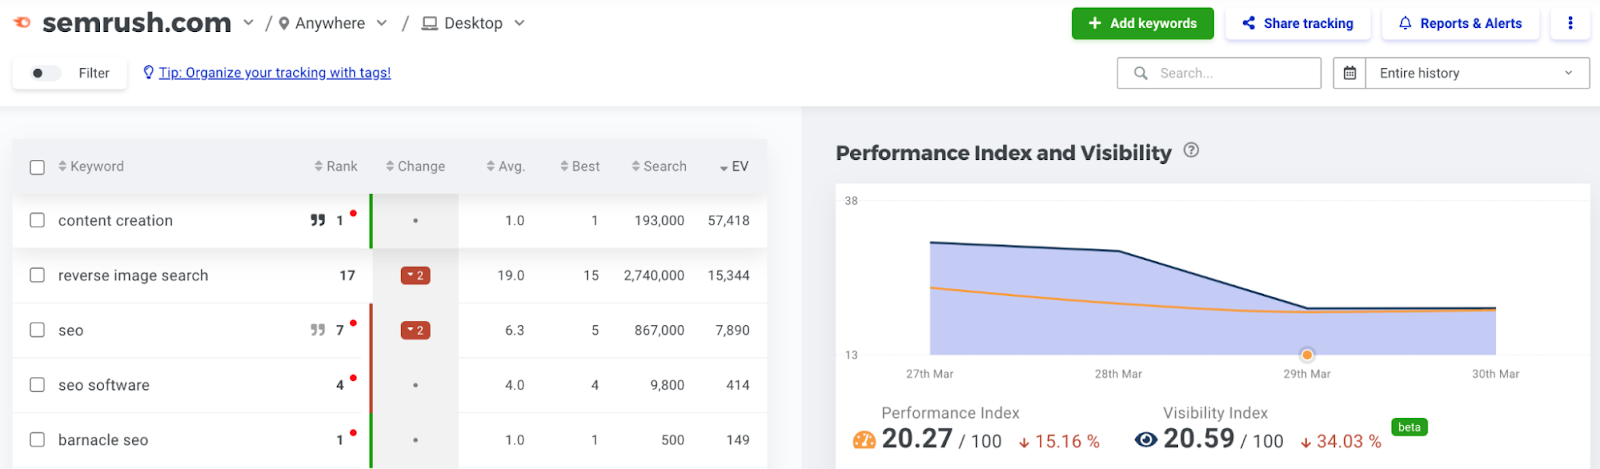 ranking changes and search visibility shown for semrush.com in SERPWatcher